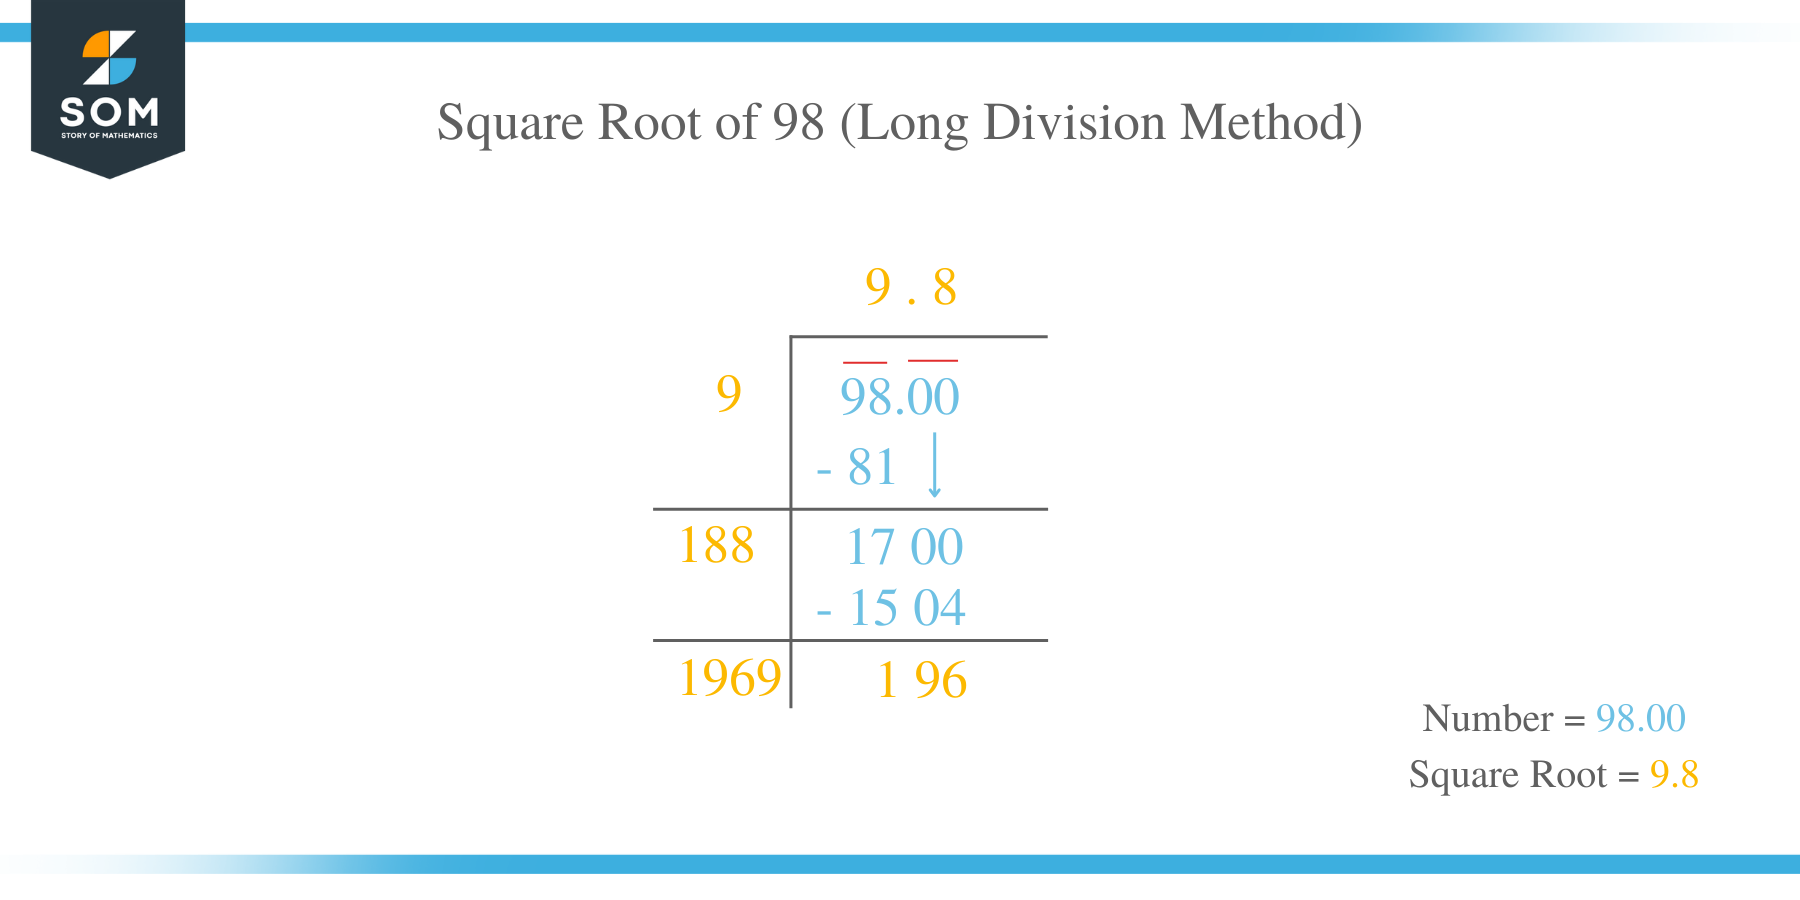 Square Root of 98 by Long Division Method